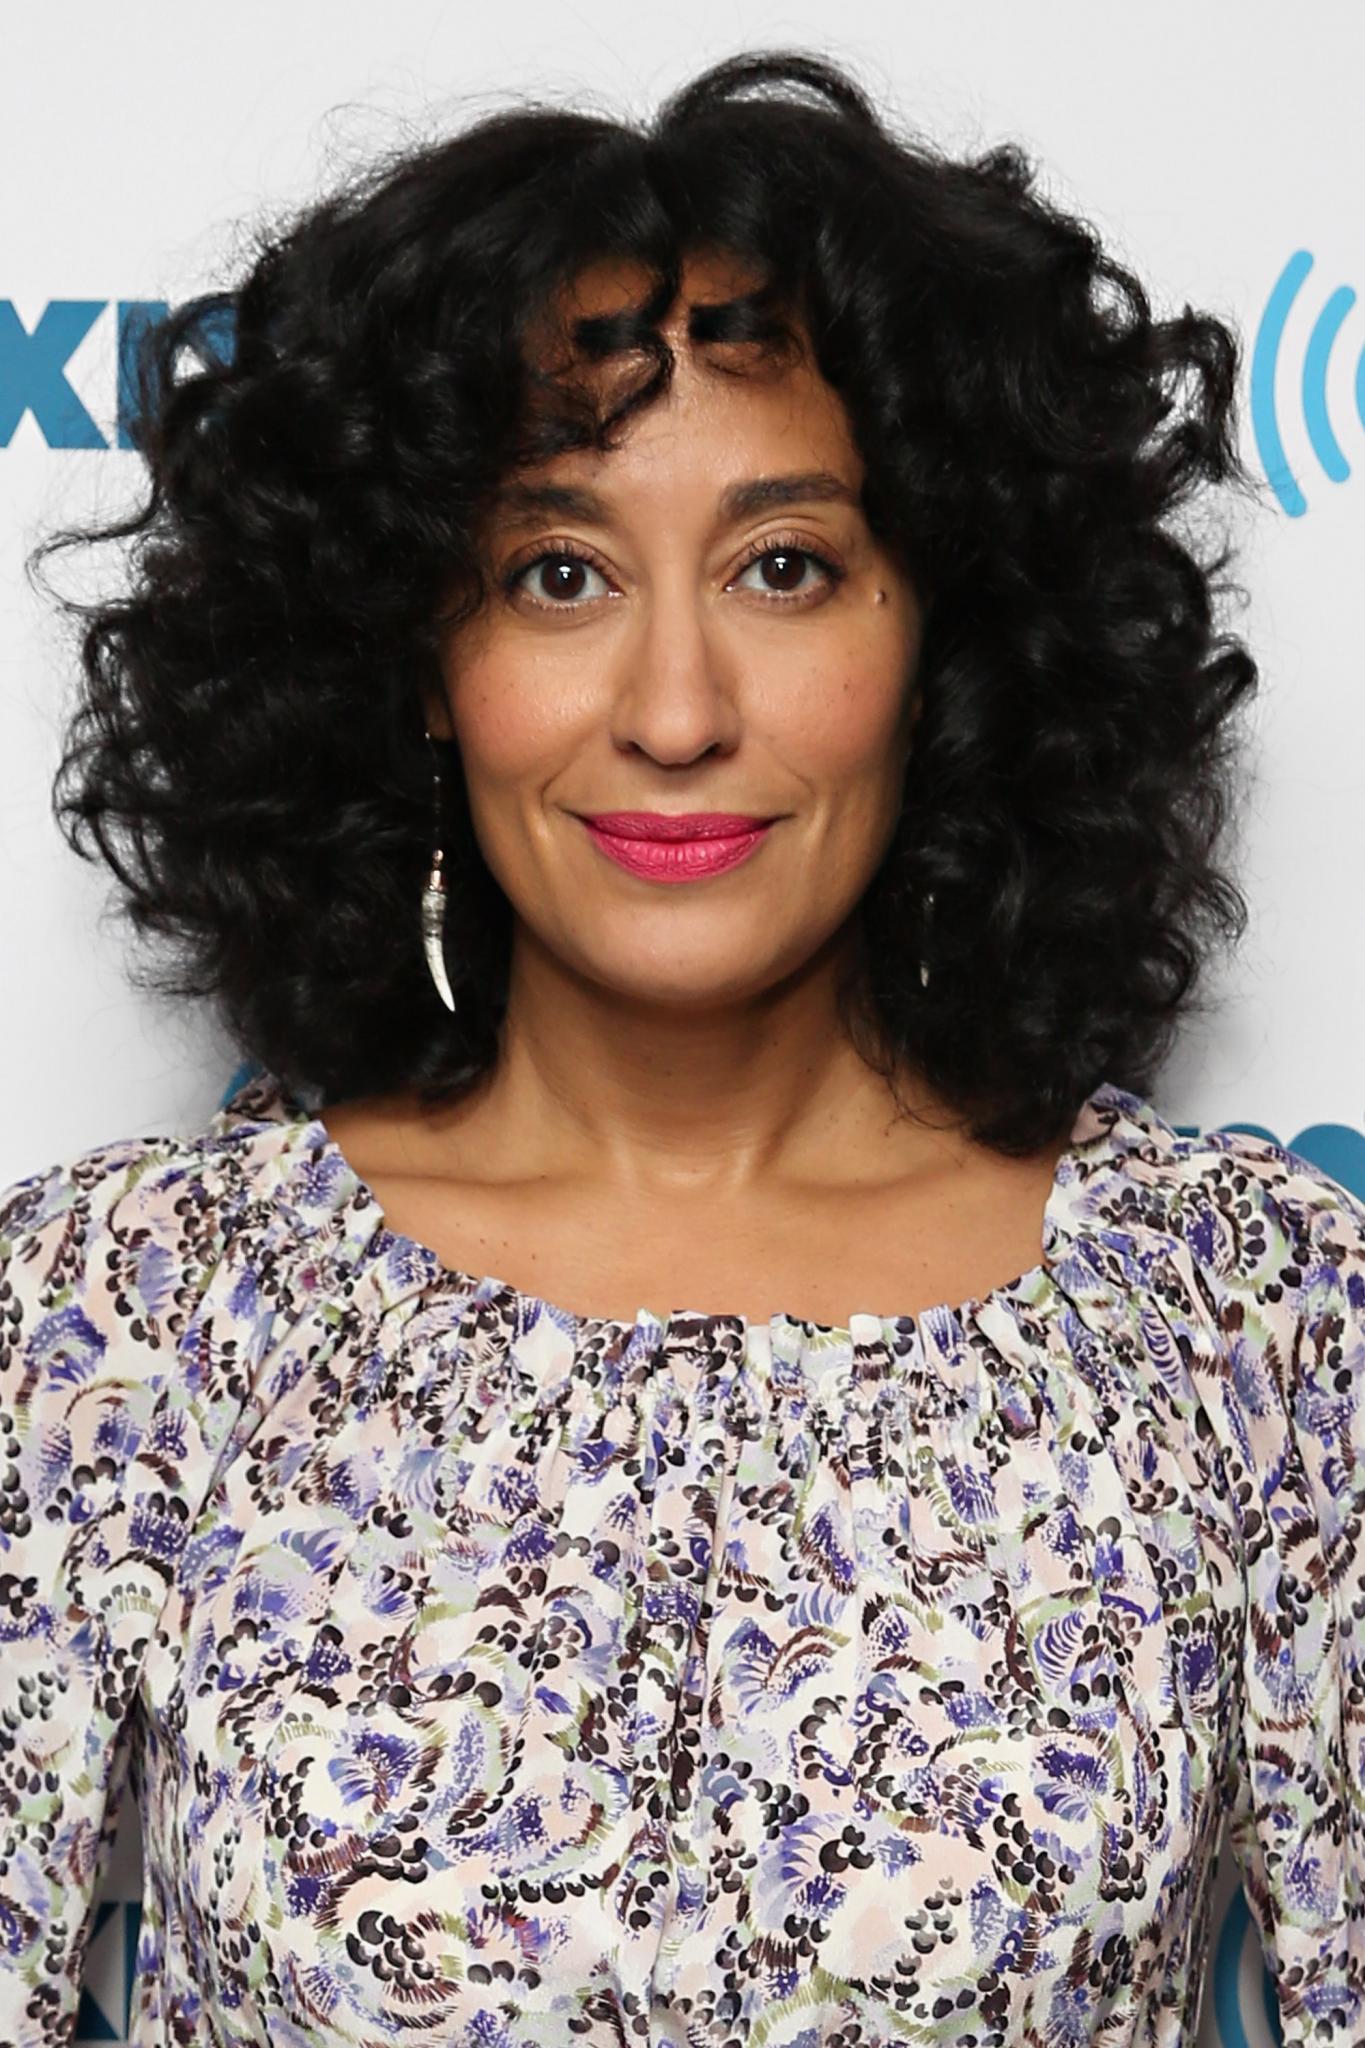 Tracee Ellis Ross on Her TV Characters: 'My Personality Falls Somewhere in Between Bow and Joan'
